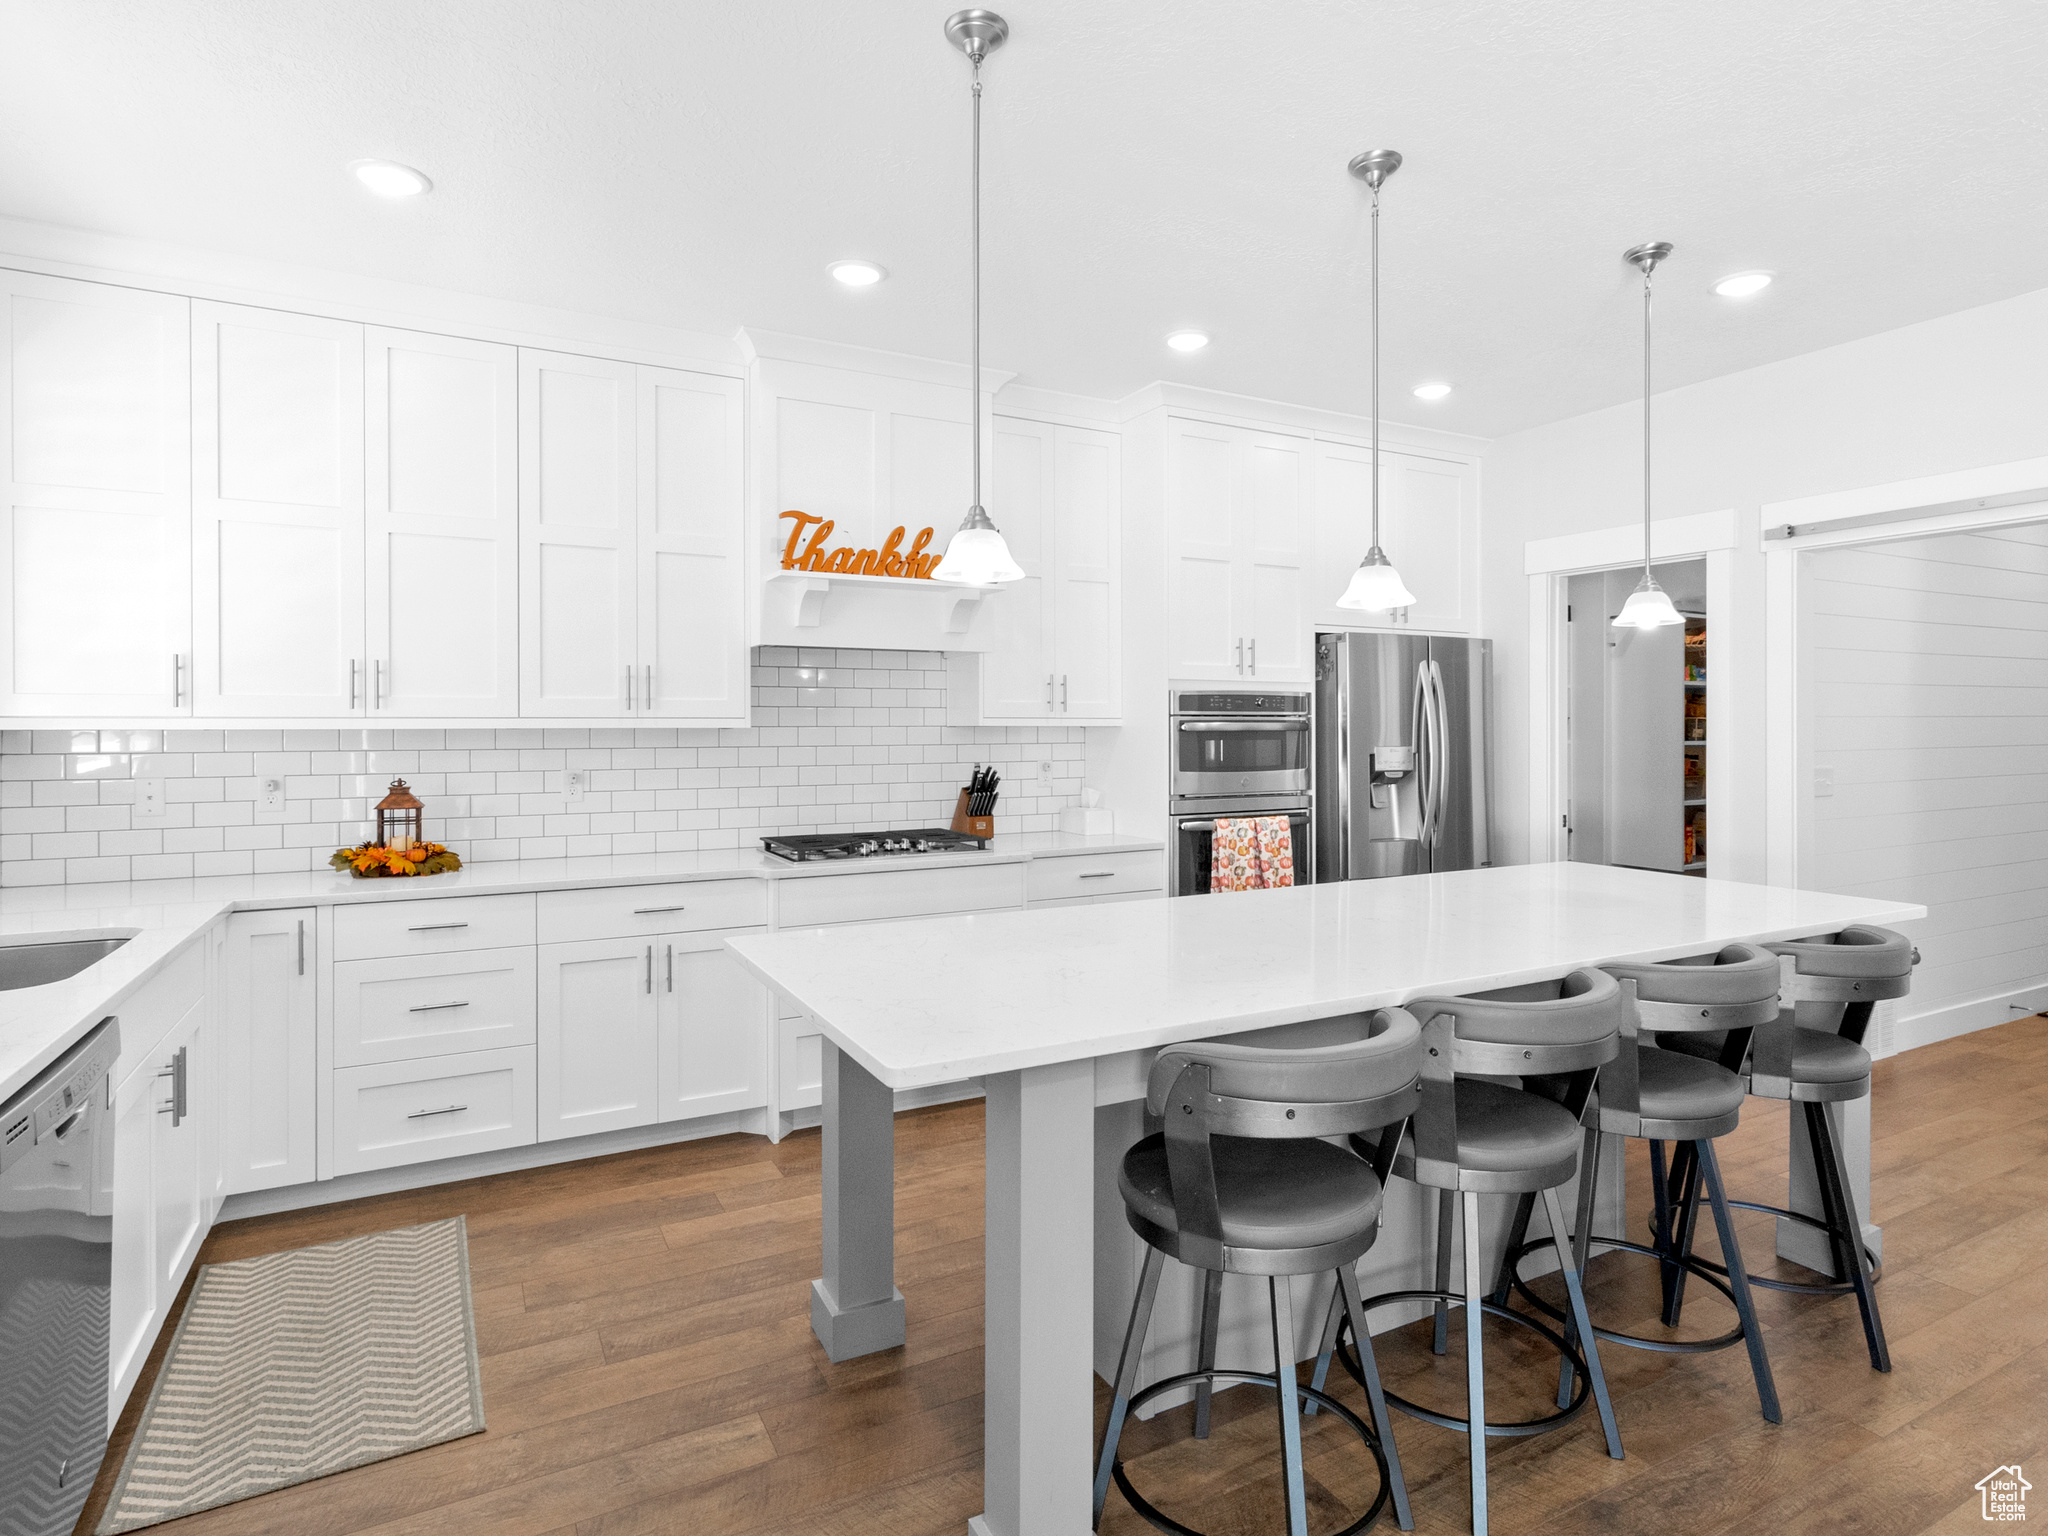 Kitchen featuring appliances with stainless steel finishes, tasteful backsplash, white cabinetry, hardwood / wood-style flooring, and a kitchen breakfast bar